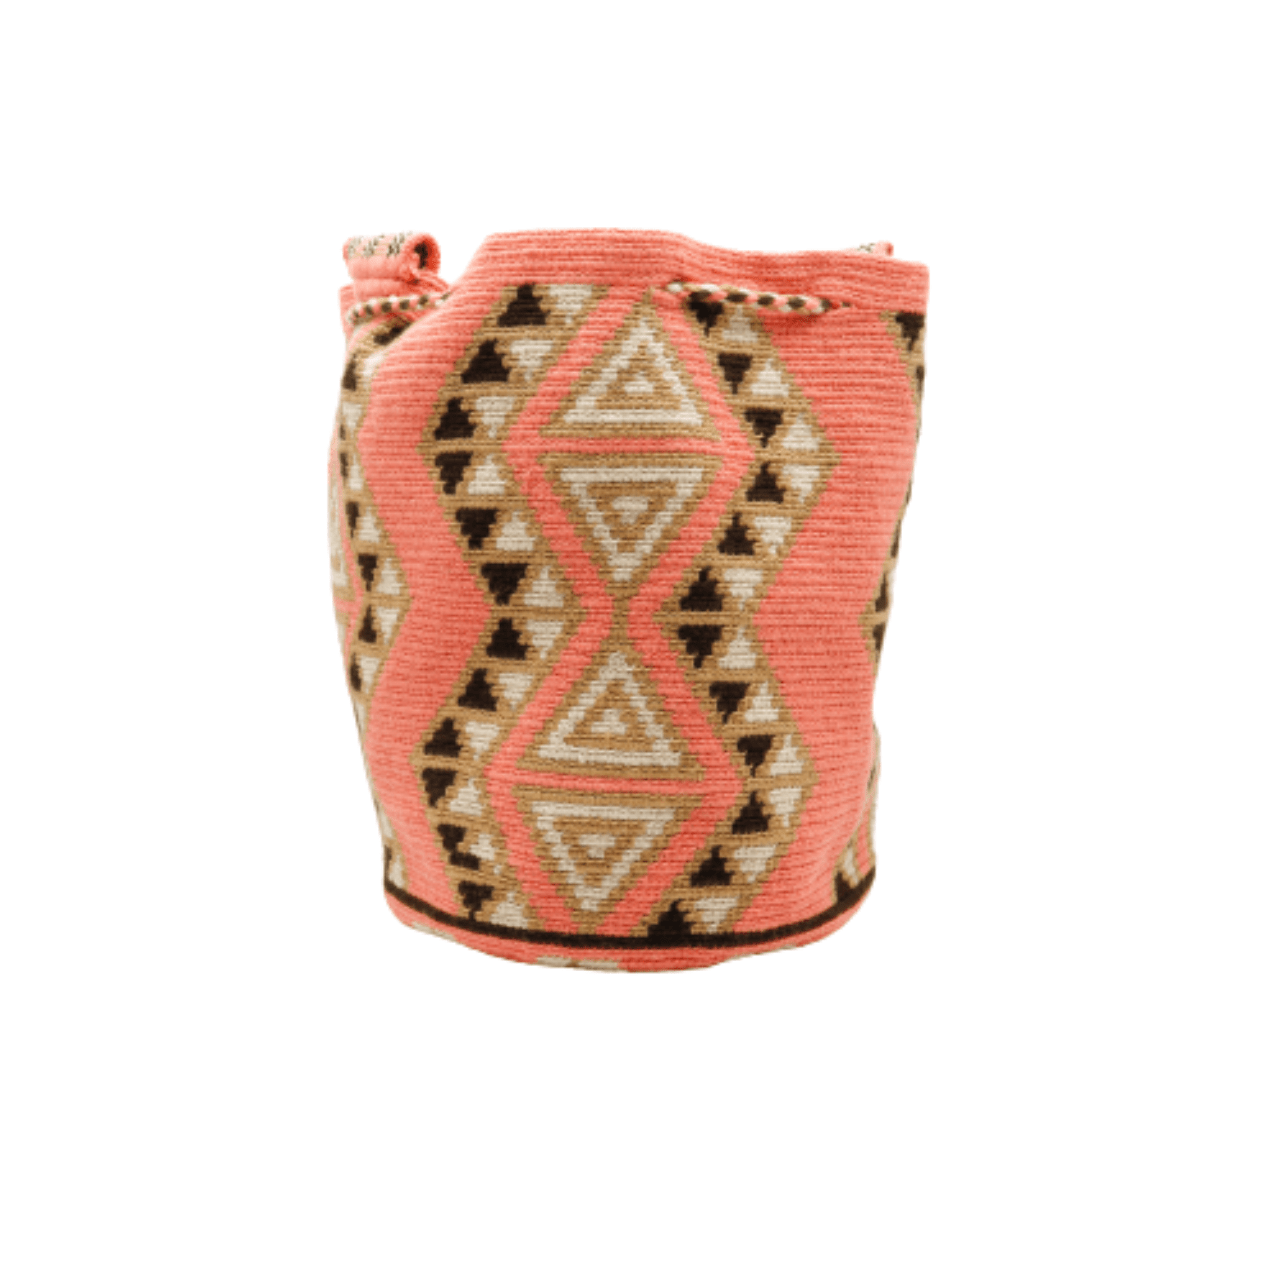 Lavinia Wayuu Bag - Rose Pink, Beige, and Brown Shades - Stunning Design - Exquisite Craftsmanship and Timeless Style